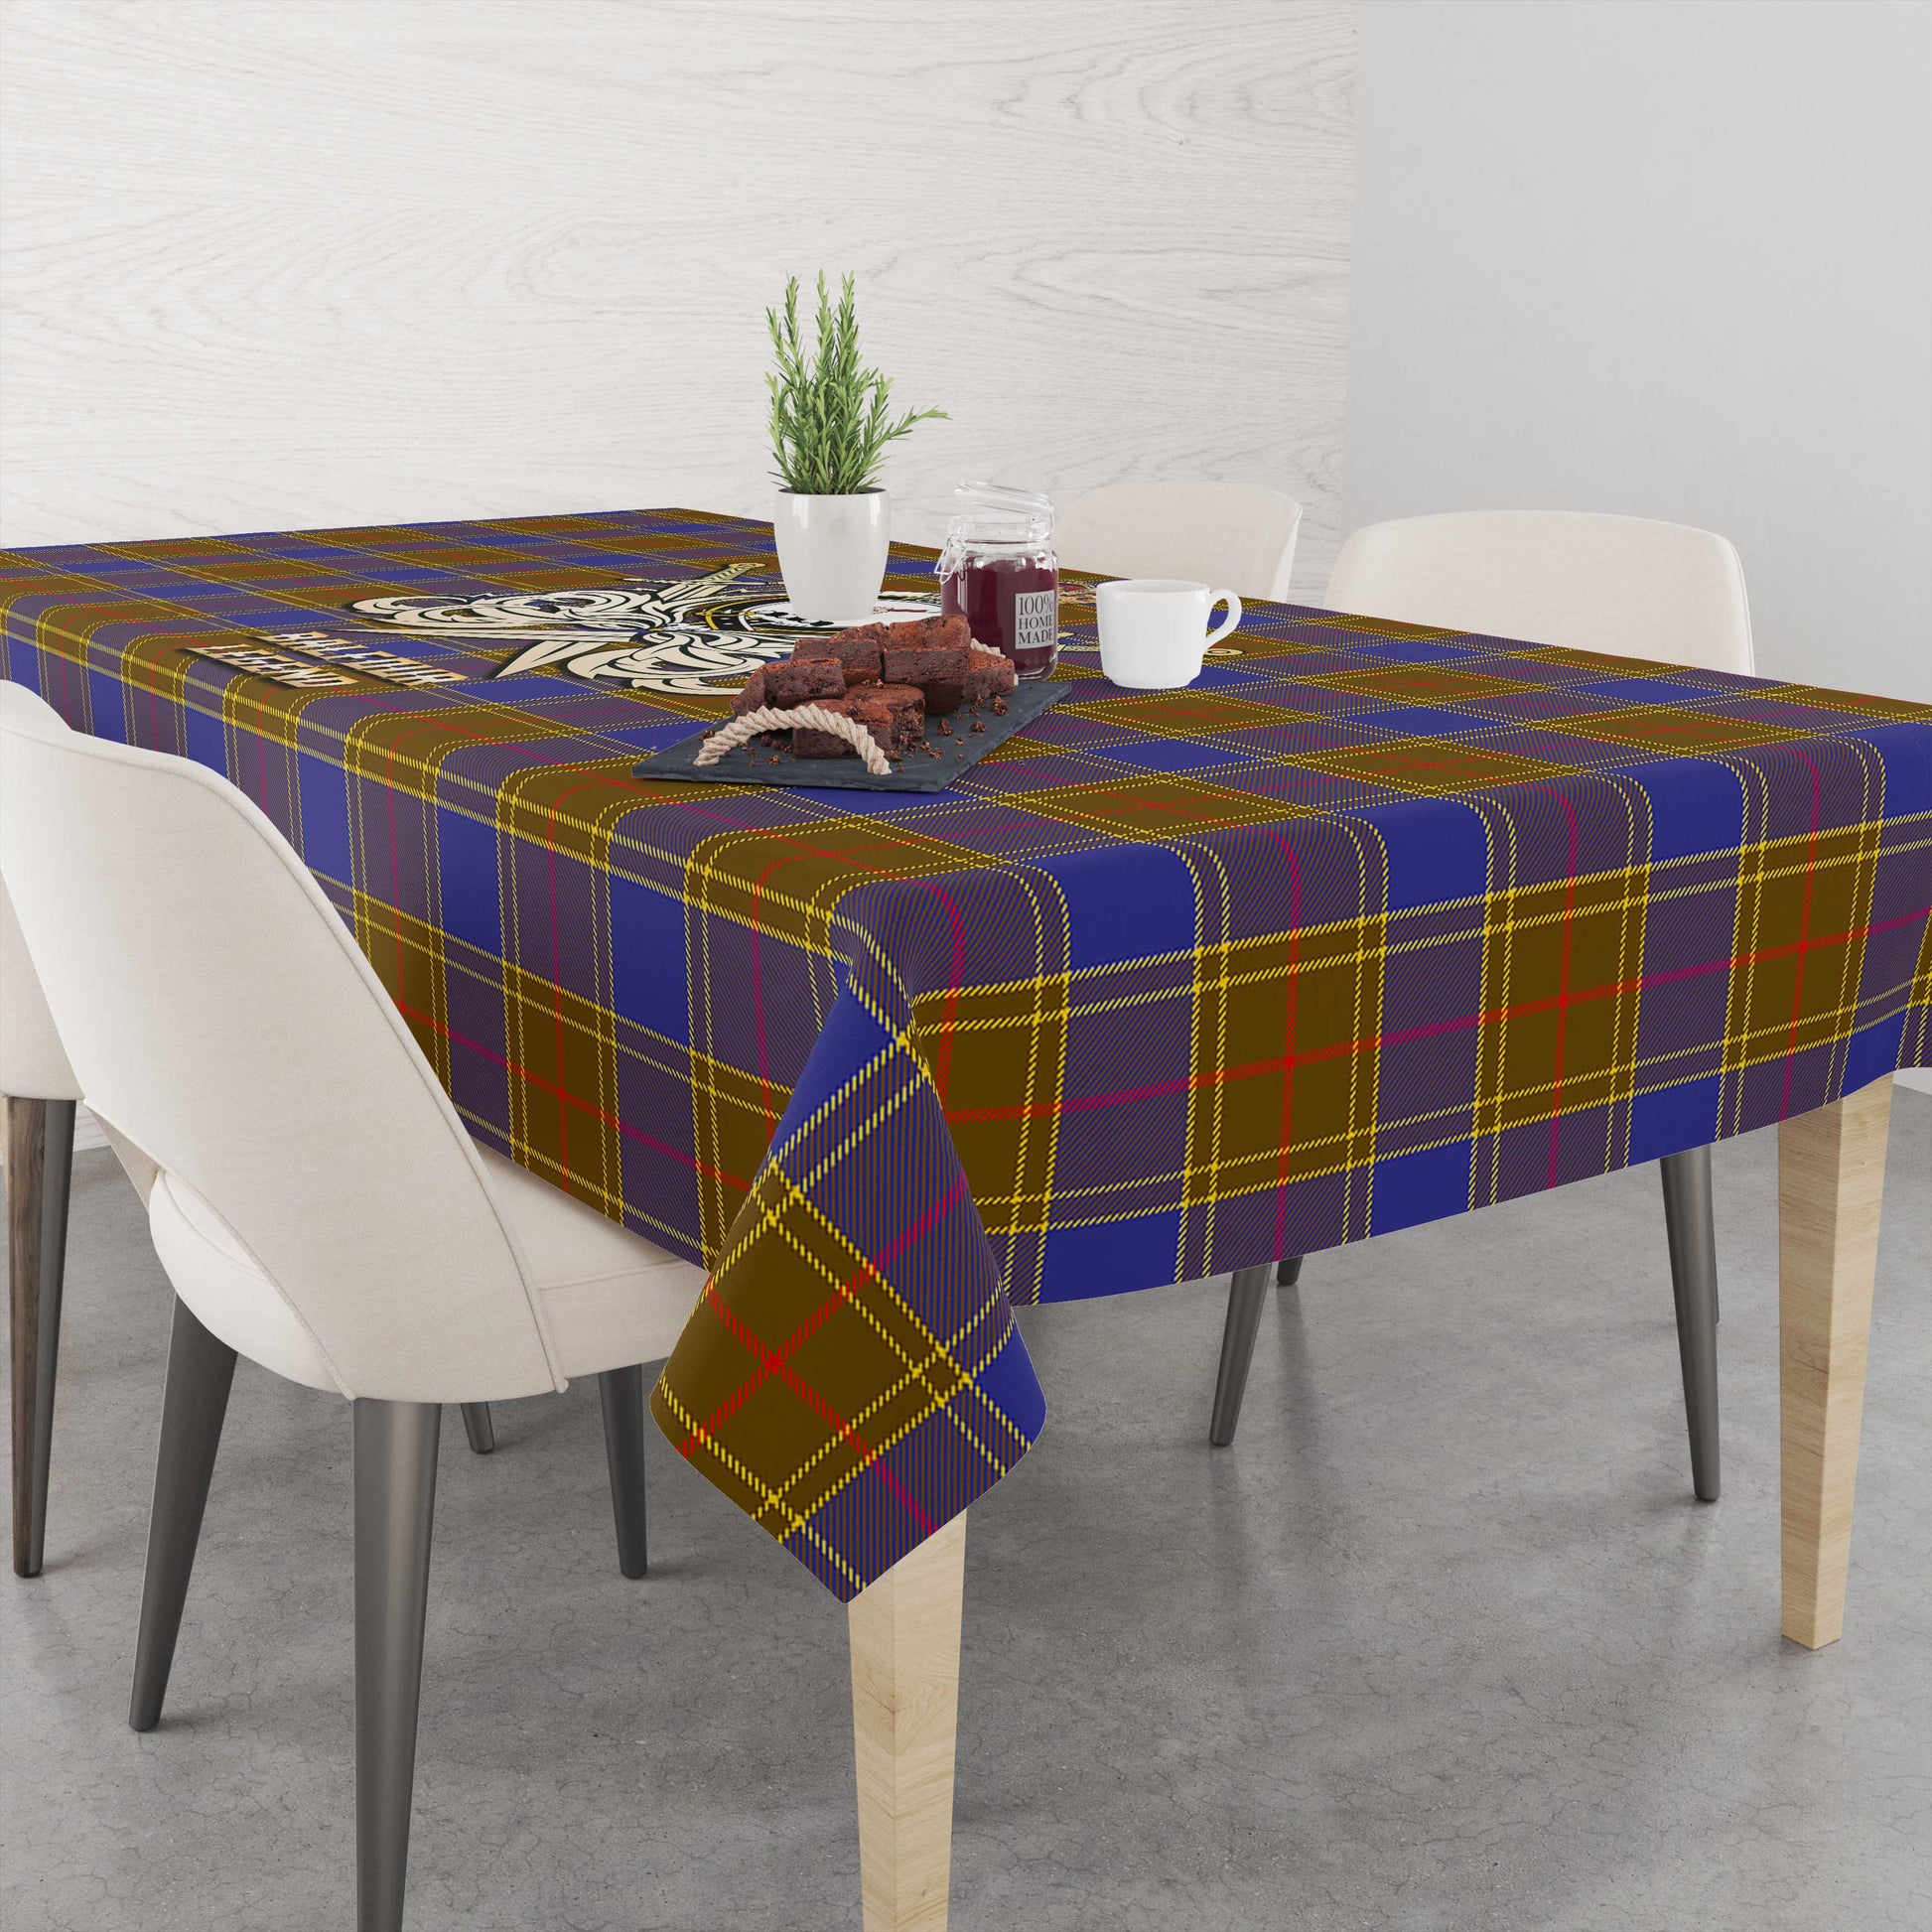 Tartan Vibes Clothing Balfour Modern Tartan Tablecloth with Clan Crest and the Golden Sword of Courageous Legacy